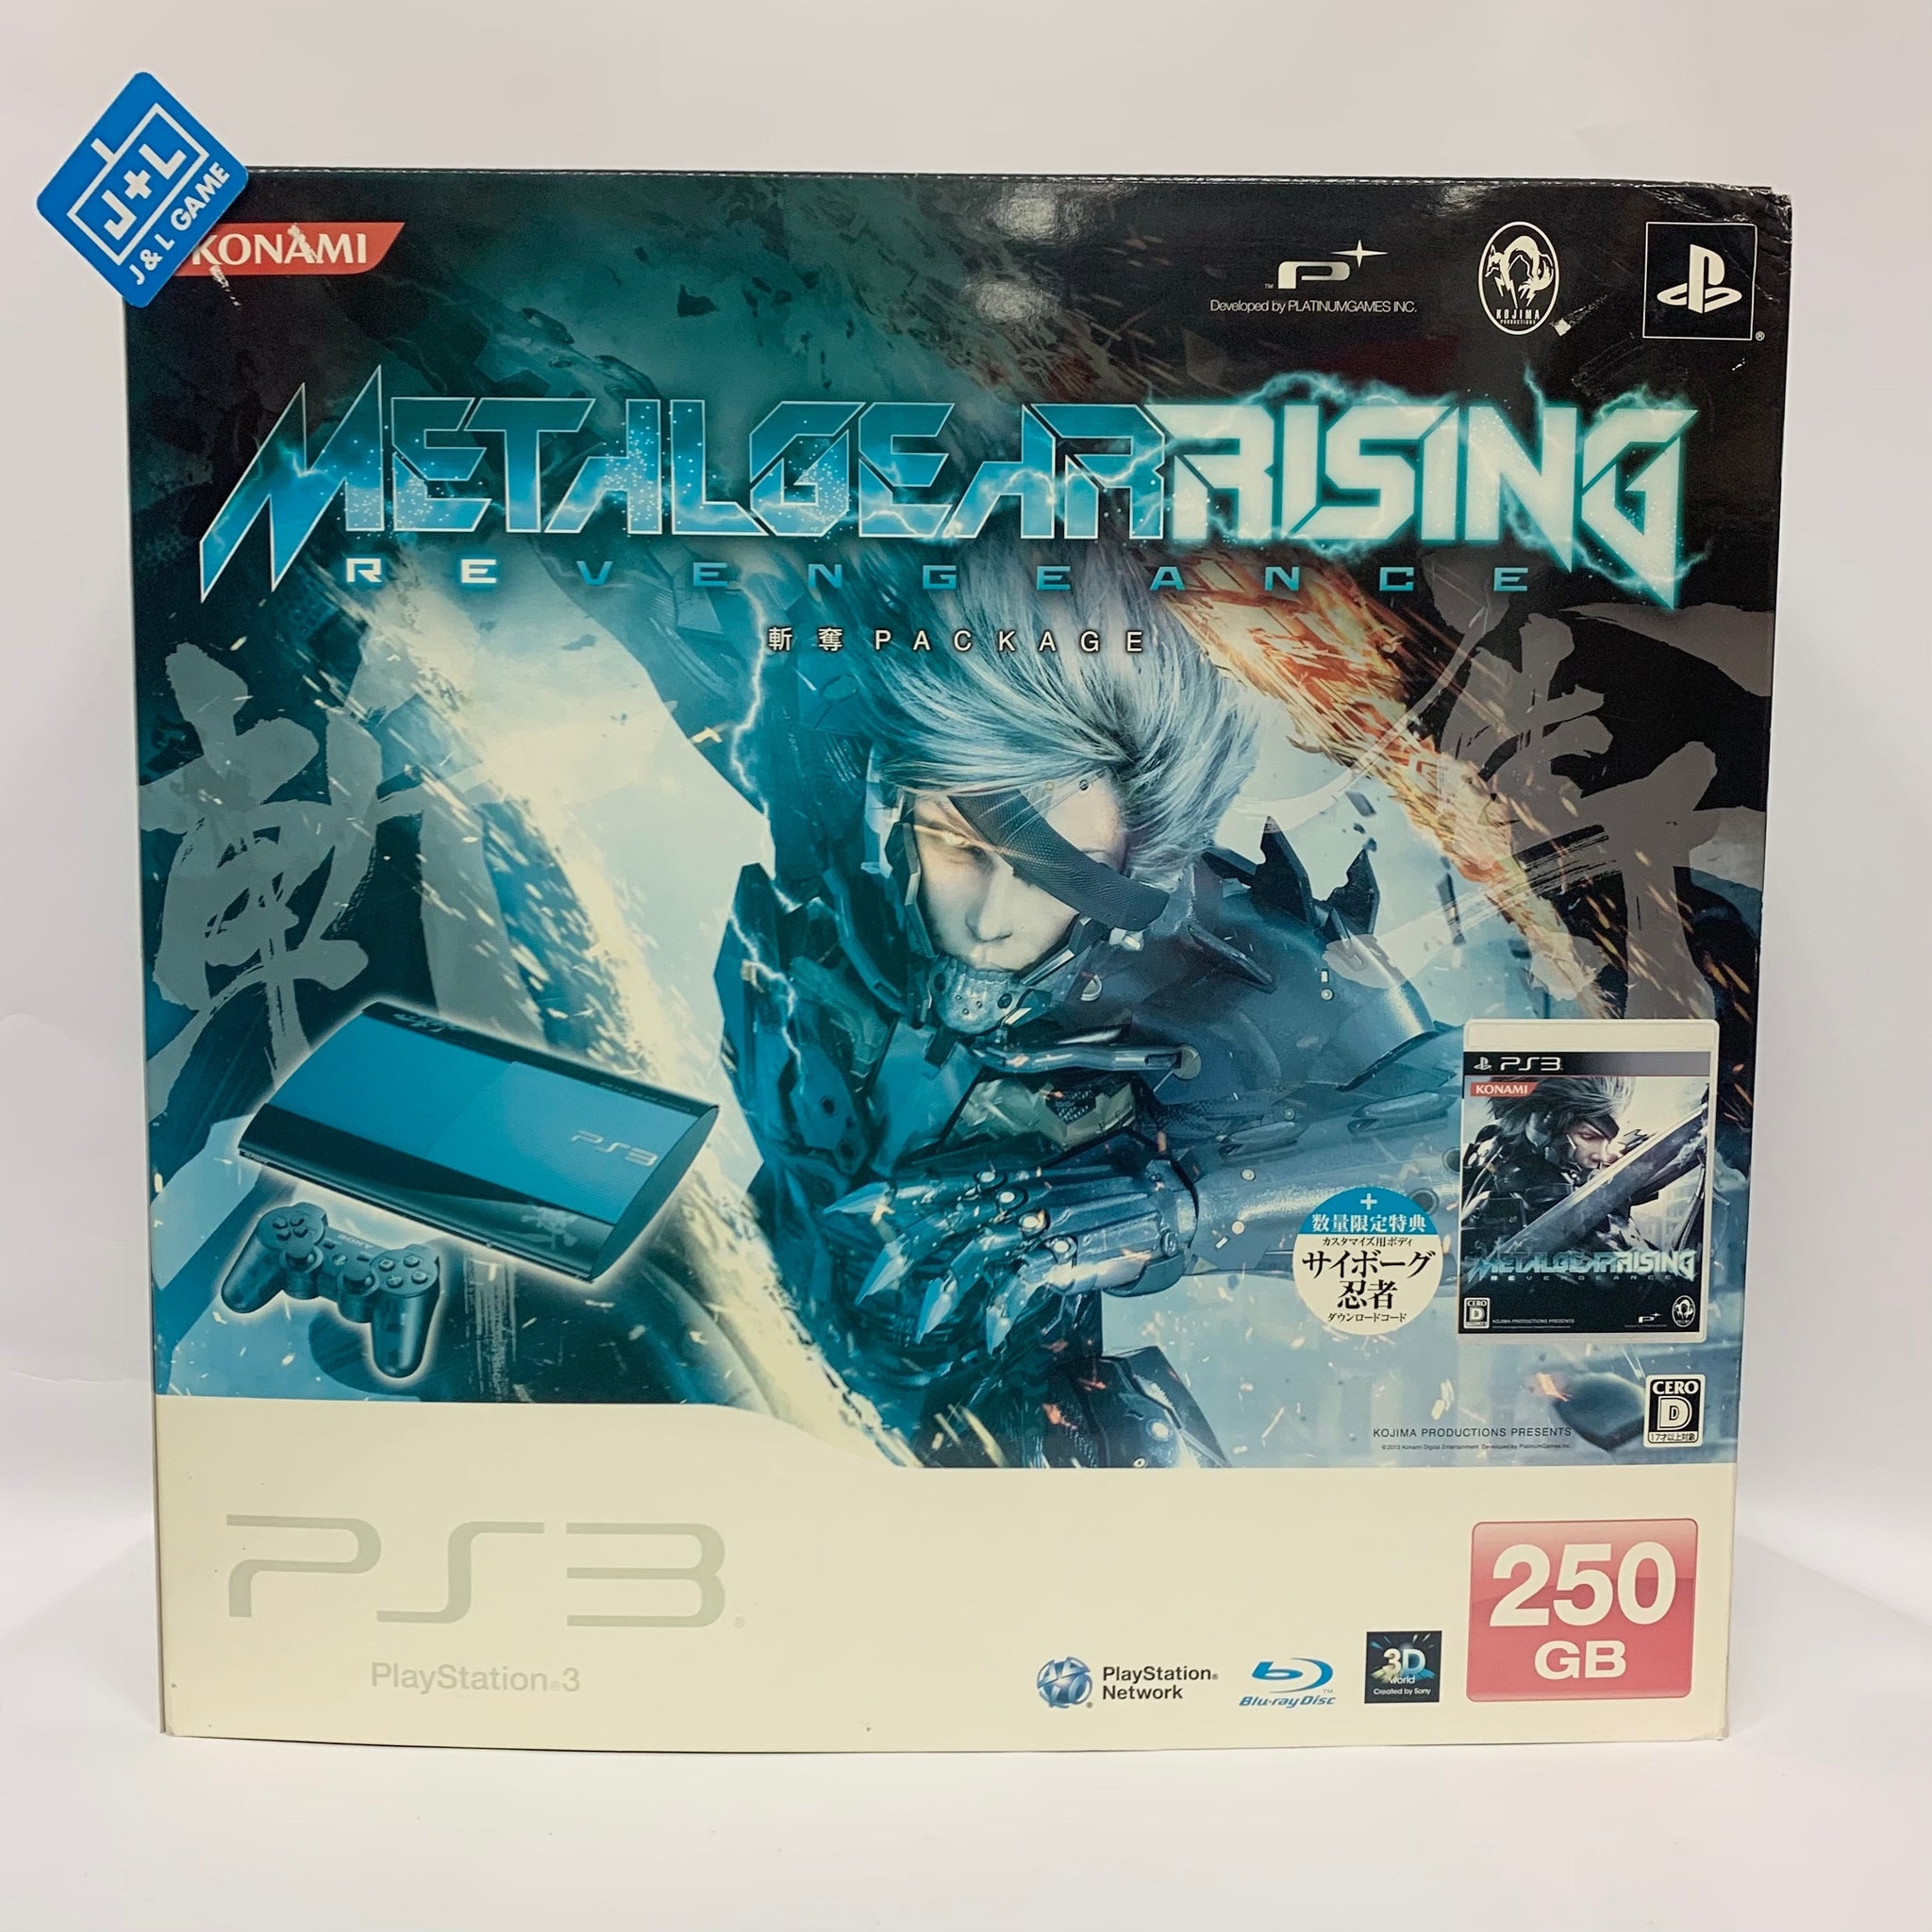 Sony PlayStation 3 Super Slim 250 GB Console Metal Gear Rising Revengeance  - (PS3) PlayStation 3 (Japanese Import) Consoles SONY   